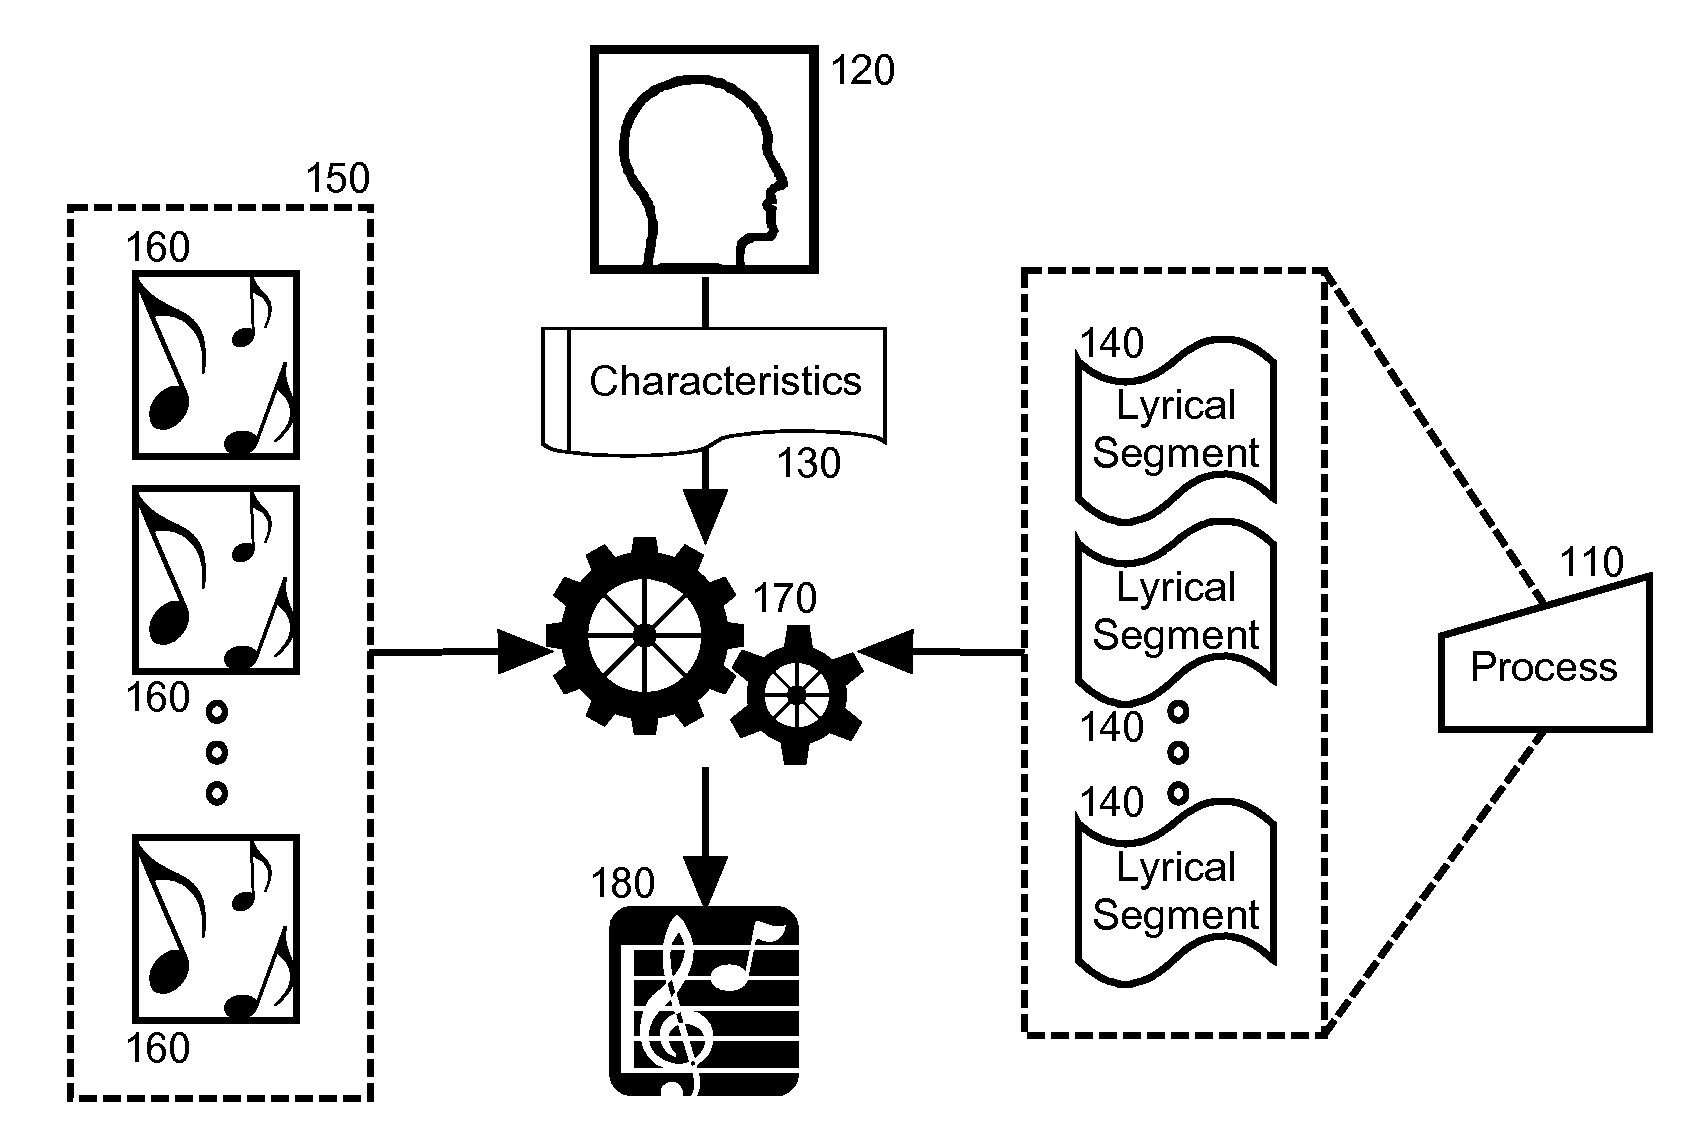 Automated generation of a song for process learning